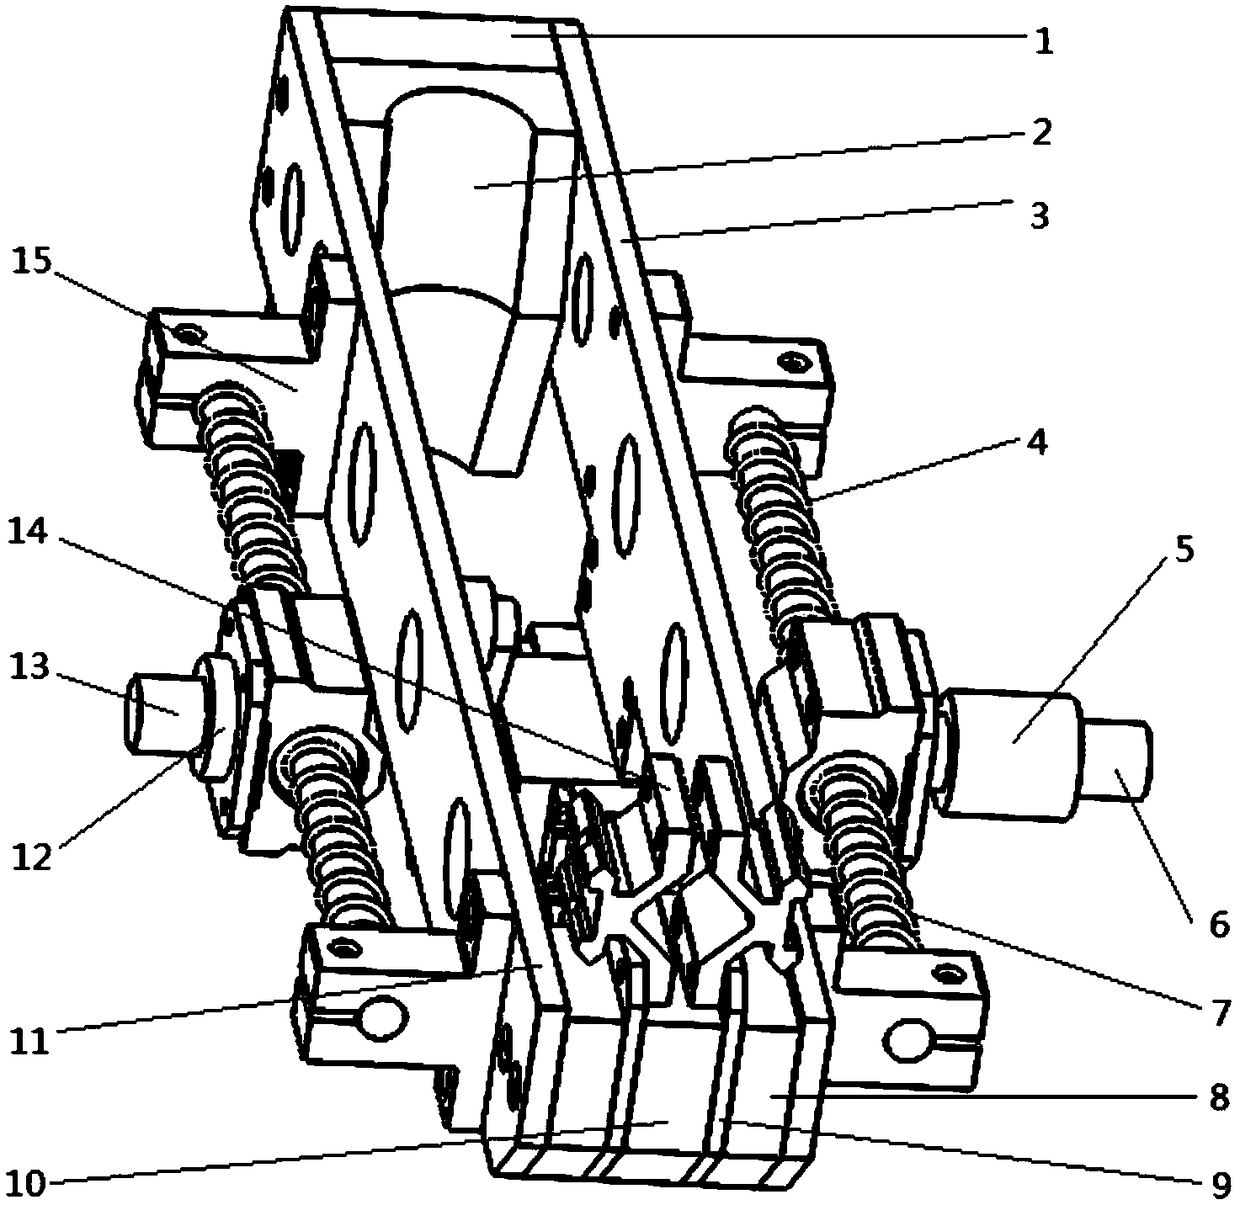 Gun clamping mechanism assembled to unmanned aerial vehicle and provided with spring buffer device